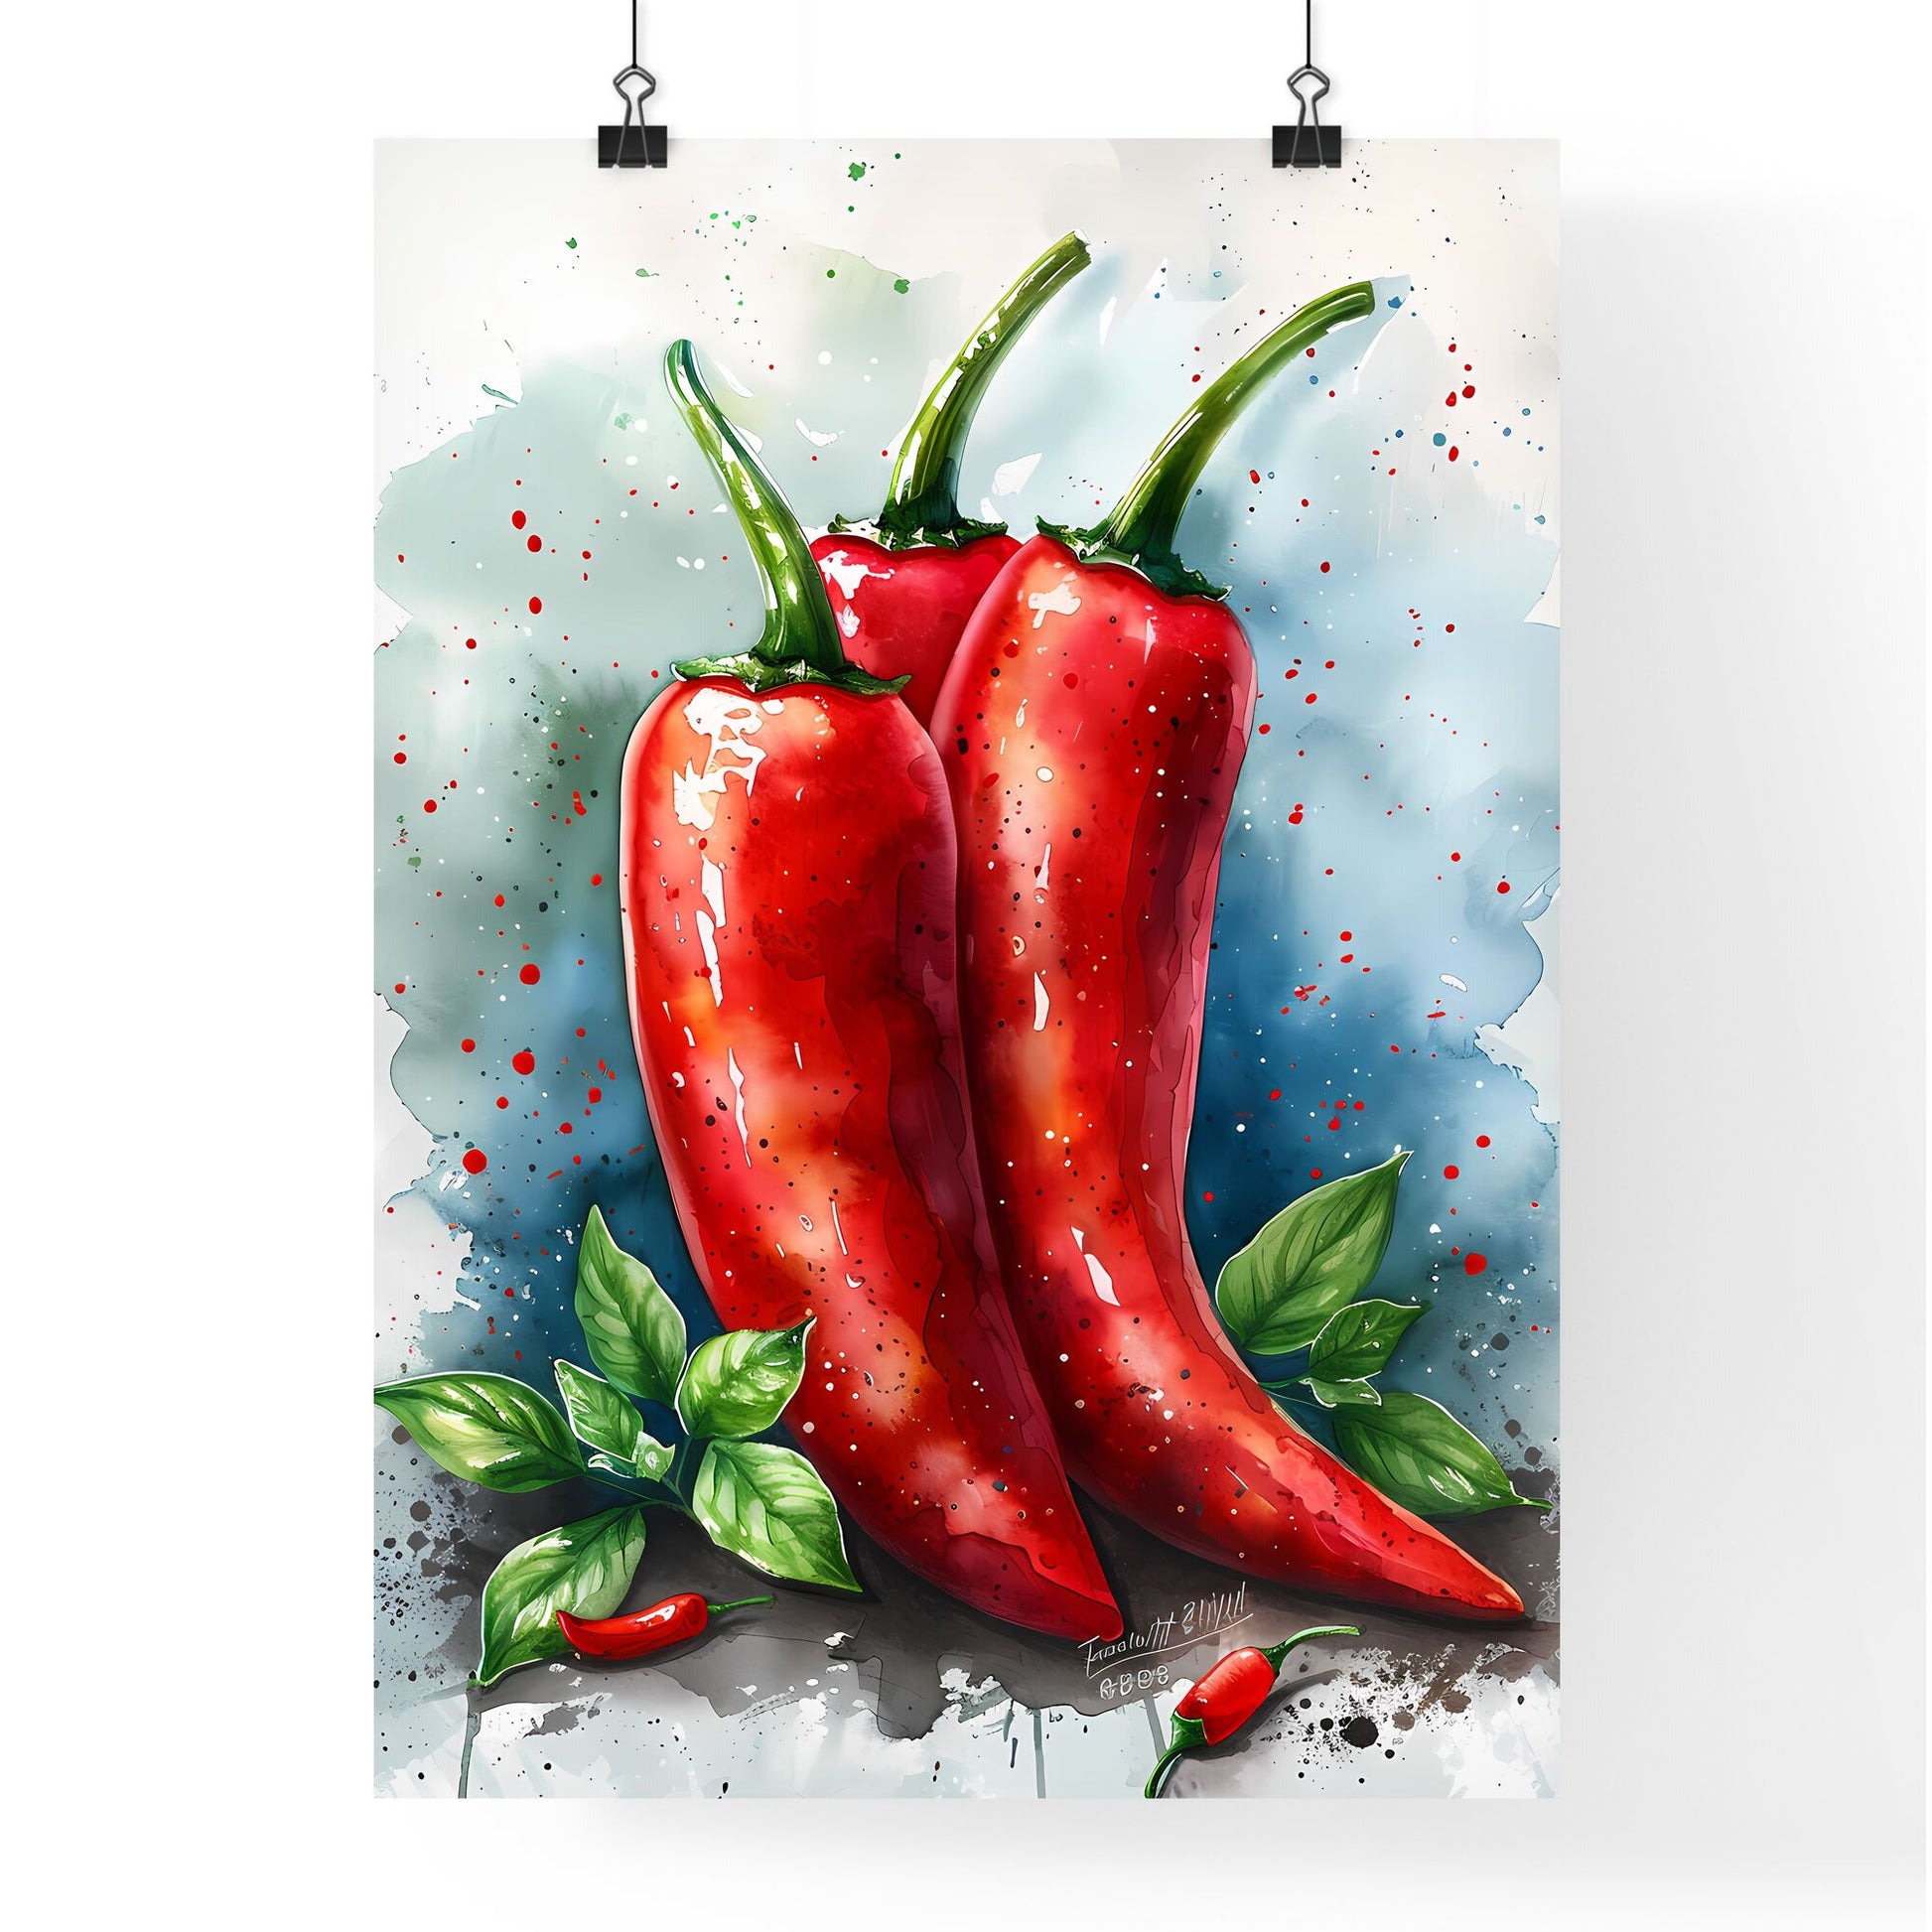 Expressive Watercolor Painting of Red Chili Peppers with Lush Green Leaves on White Background Default Title